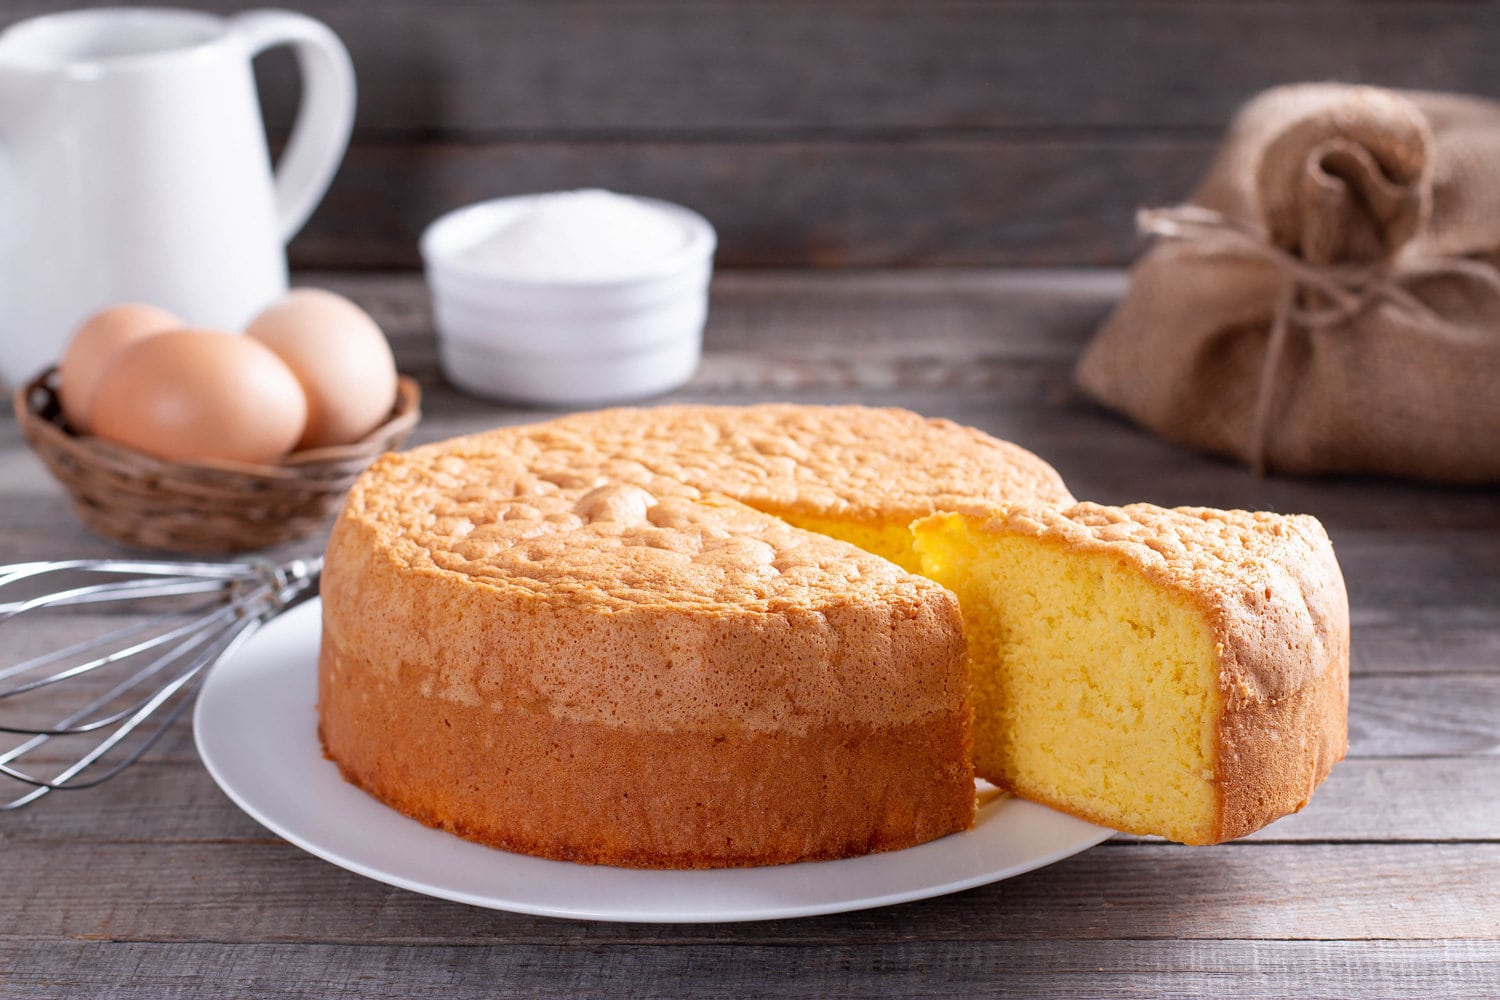 Homemade round sponge cake or chiffon cake on white plate so soft and delicious with ingredients eggs, flour, milk on wood table. Homemade bakery concept for background and wallpaper.